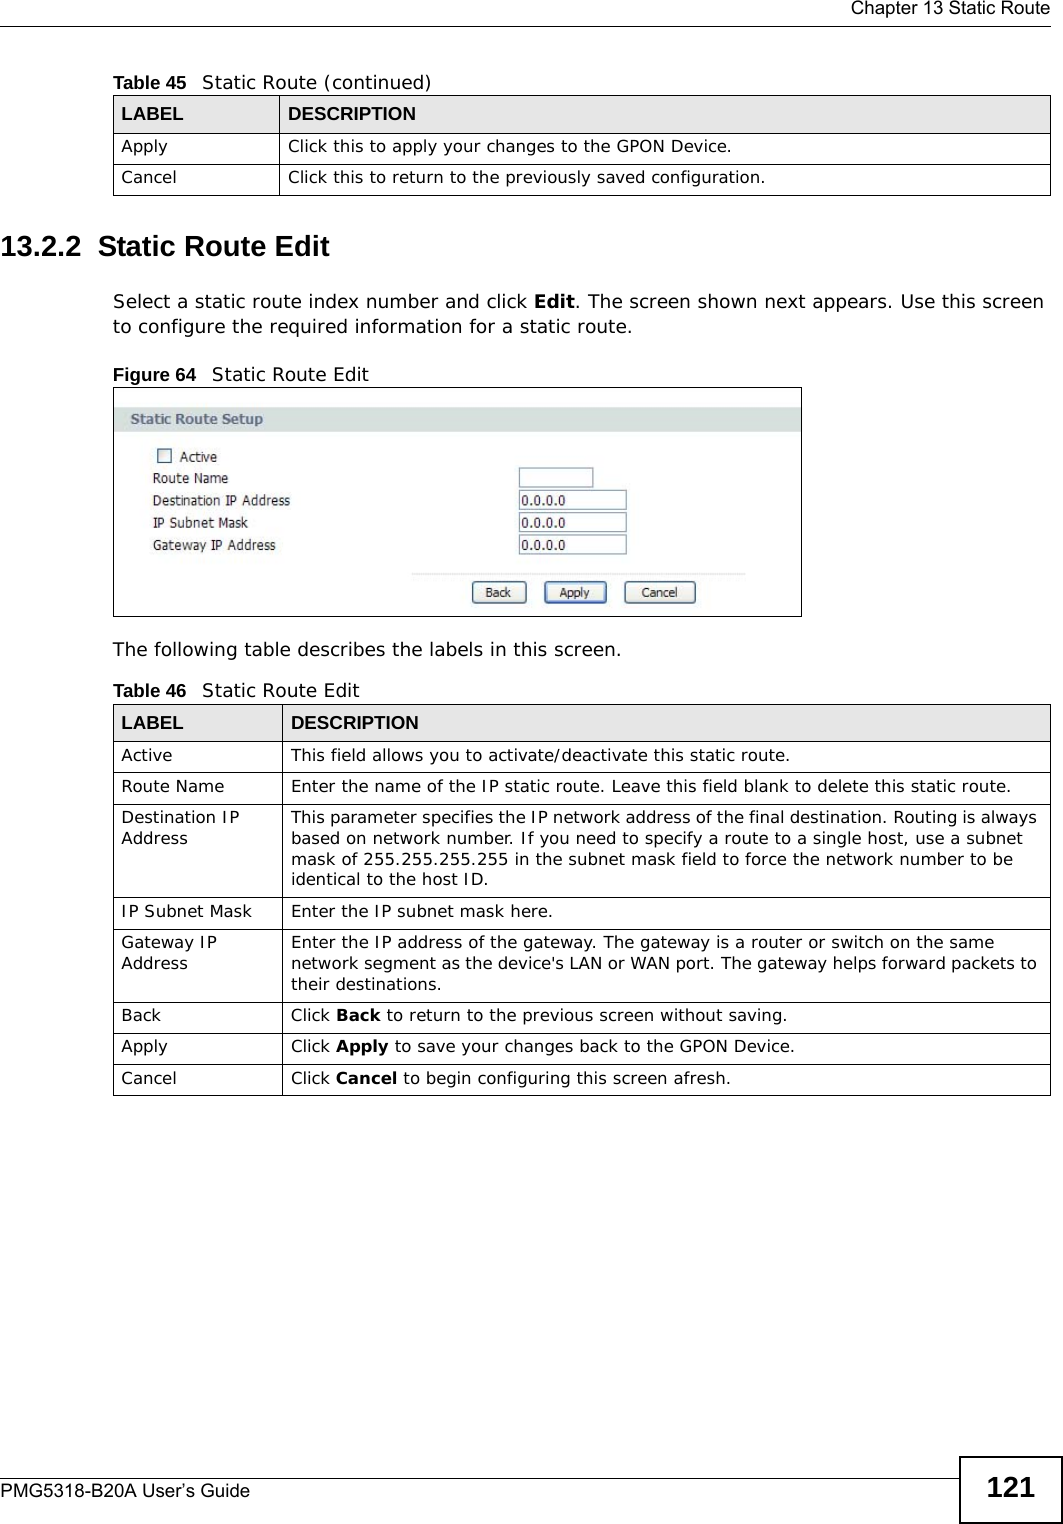  Chapter 13 Static RoutePMG5318-B20A User’s Guide 12113.2.2  Static Route Edit   Select a static route index number and click Edit. The screen shown next appears. Use this screen to configure the required information for a static route.Figure 64   Static Route EditThe following table describes the labels in this screen. Apply Click this to apply your changes to the GPON Device.Cancel Click this to return to the previously saved configuration.Table 45   Static Route (continued)LABEL DESCRIPTIONTable 46   Static Route EditLABEL DESCRIPTIONActive This field allows you to activate/deactivate this static route.Route Name Enter the name of the IP static route. Leave this field blank to delete this static route.Destination IP Address This parameter specifies the IP network address of the final destination. Routing is always based on network number. If you need to specify a route to a single host, use a subnet mask of 255.255.255.255 in the subnet mask field to force the network number to be identical to the host ID.IP Subnet Mask  Enter the IP subnet mask here.Gateway IP Address Enter the IP address of the gateway. The gateway is a router or switch on the same network segment as the device&apos;s LAN or WAN port. The gateway helps forward packets to their destinations.Back Click Back to return to the previous screen without saving.Apply Click Apply to save your changes back to the GPON Device.Cancel Click Cancel to begin configuring this screen afresh.